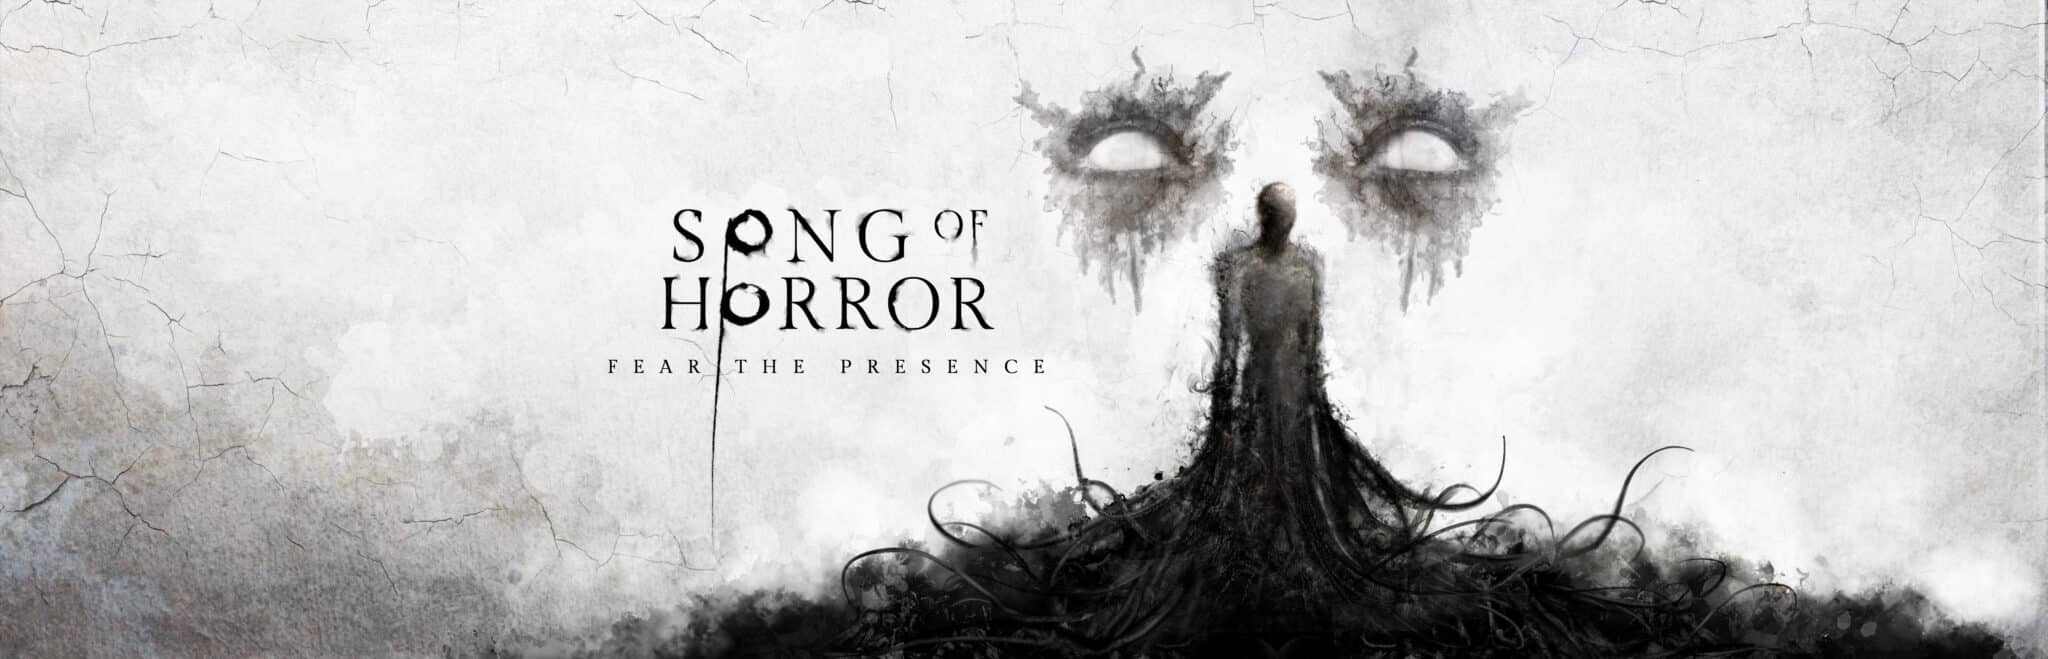 Song of horror steam фото 76